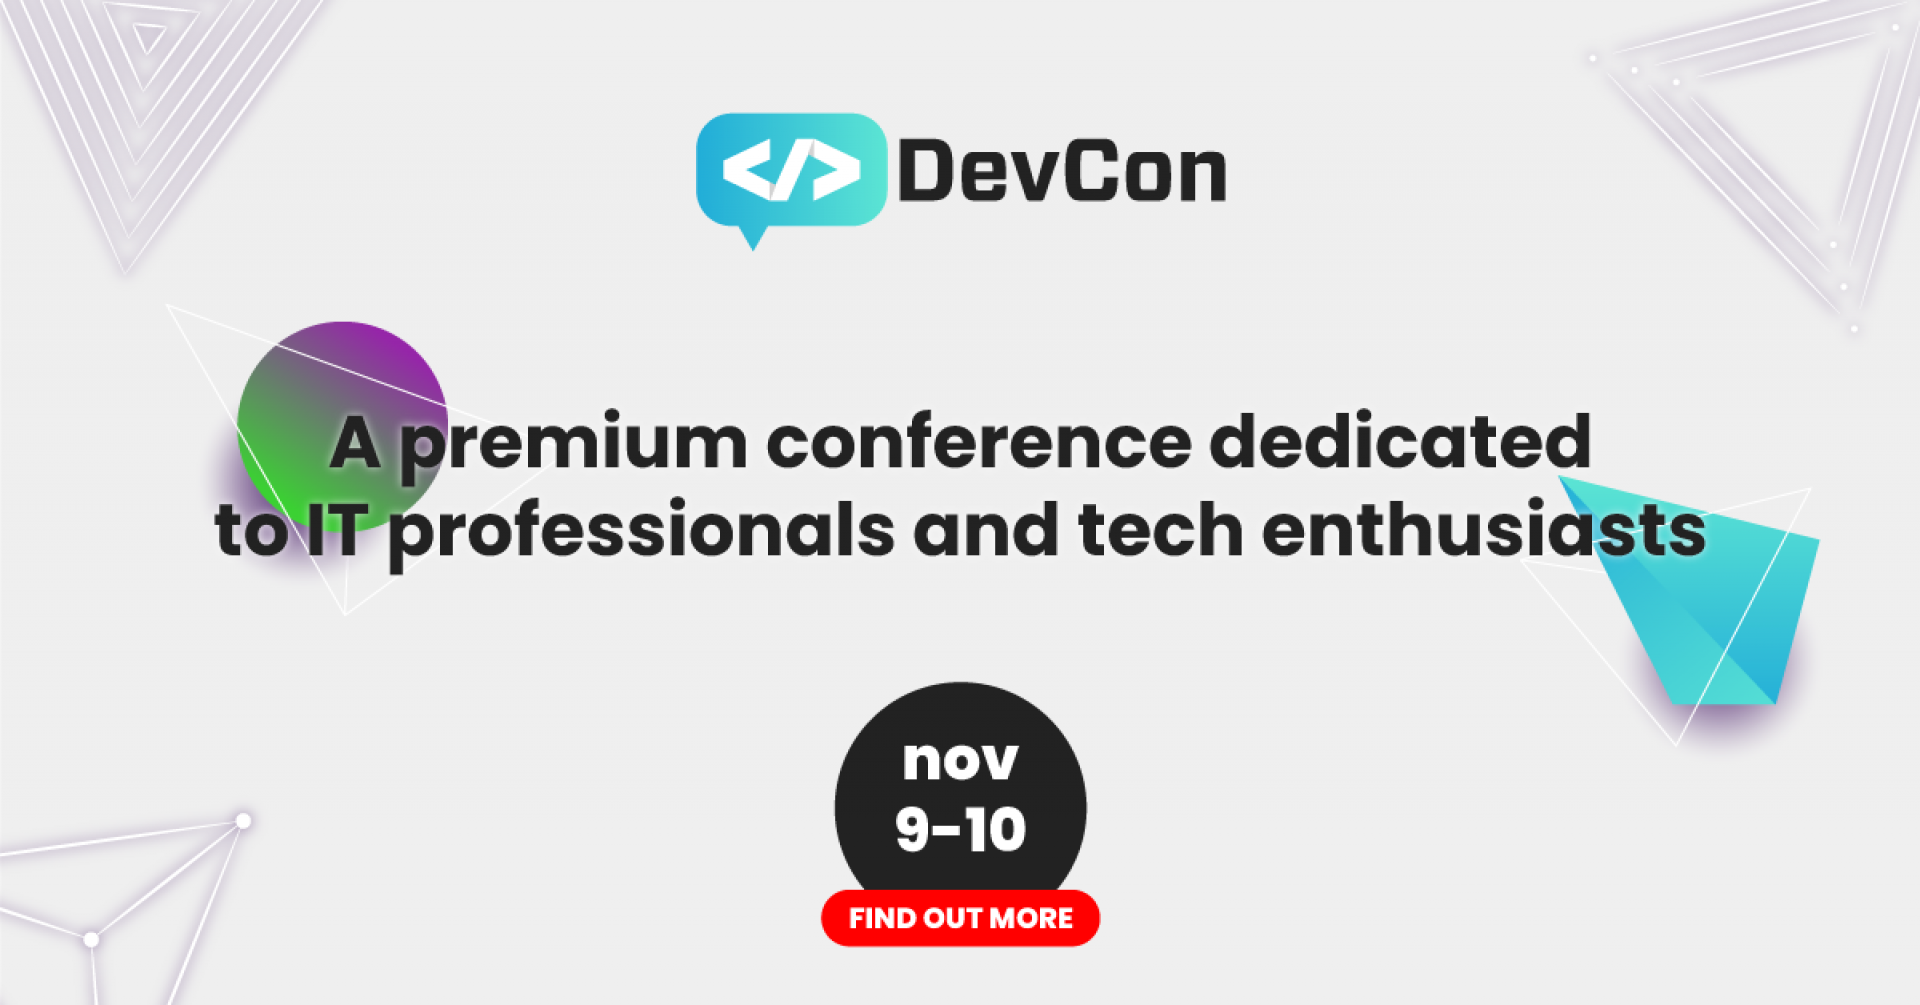 DEVCON IS BACK WITH A NEW HYBRID EDITION